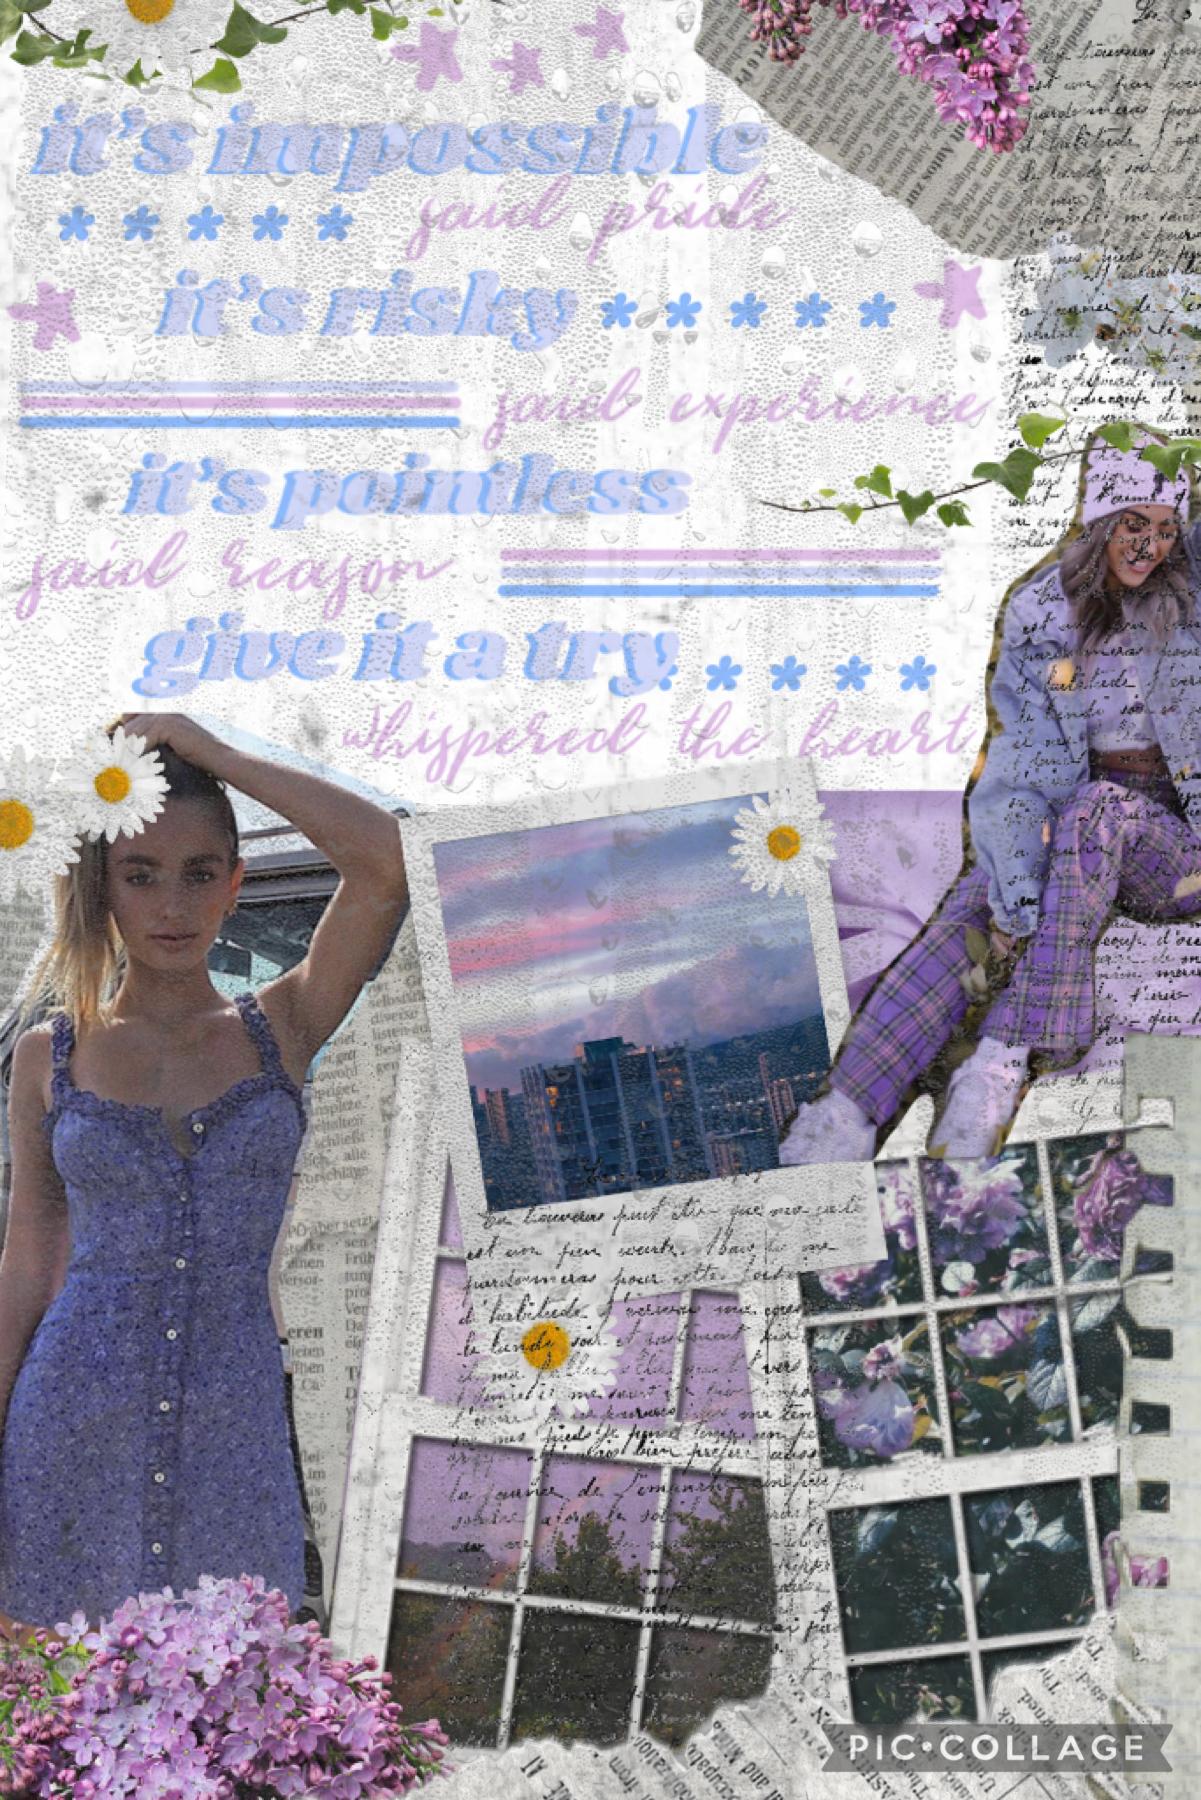 💜 t a p 💜
idk how i feel about this collage 🤔 I tried to some purple and blue tones. also I’m going to try and do a QOTD! so here we go. QOTD: what’s ur fav color? AOTD: sage green!